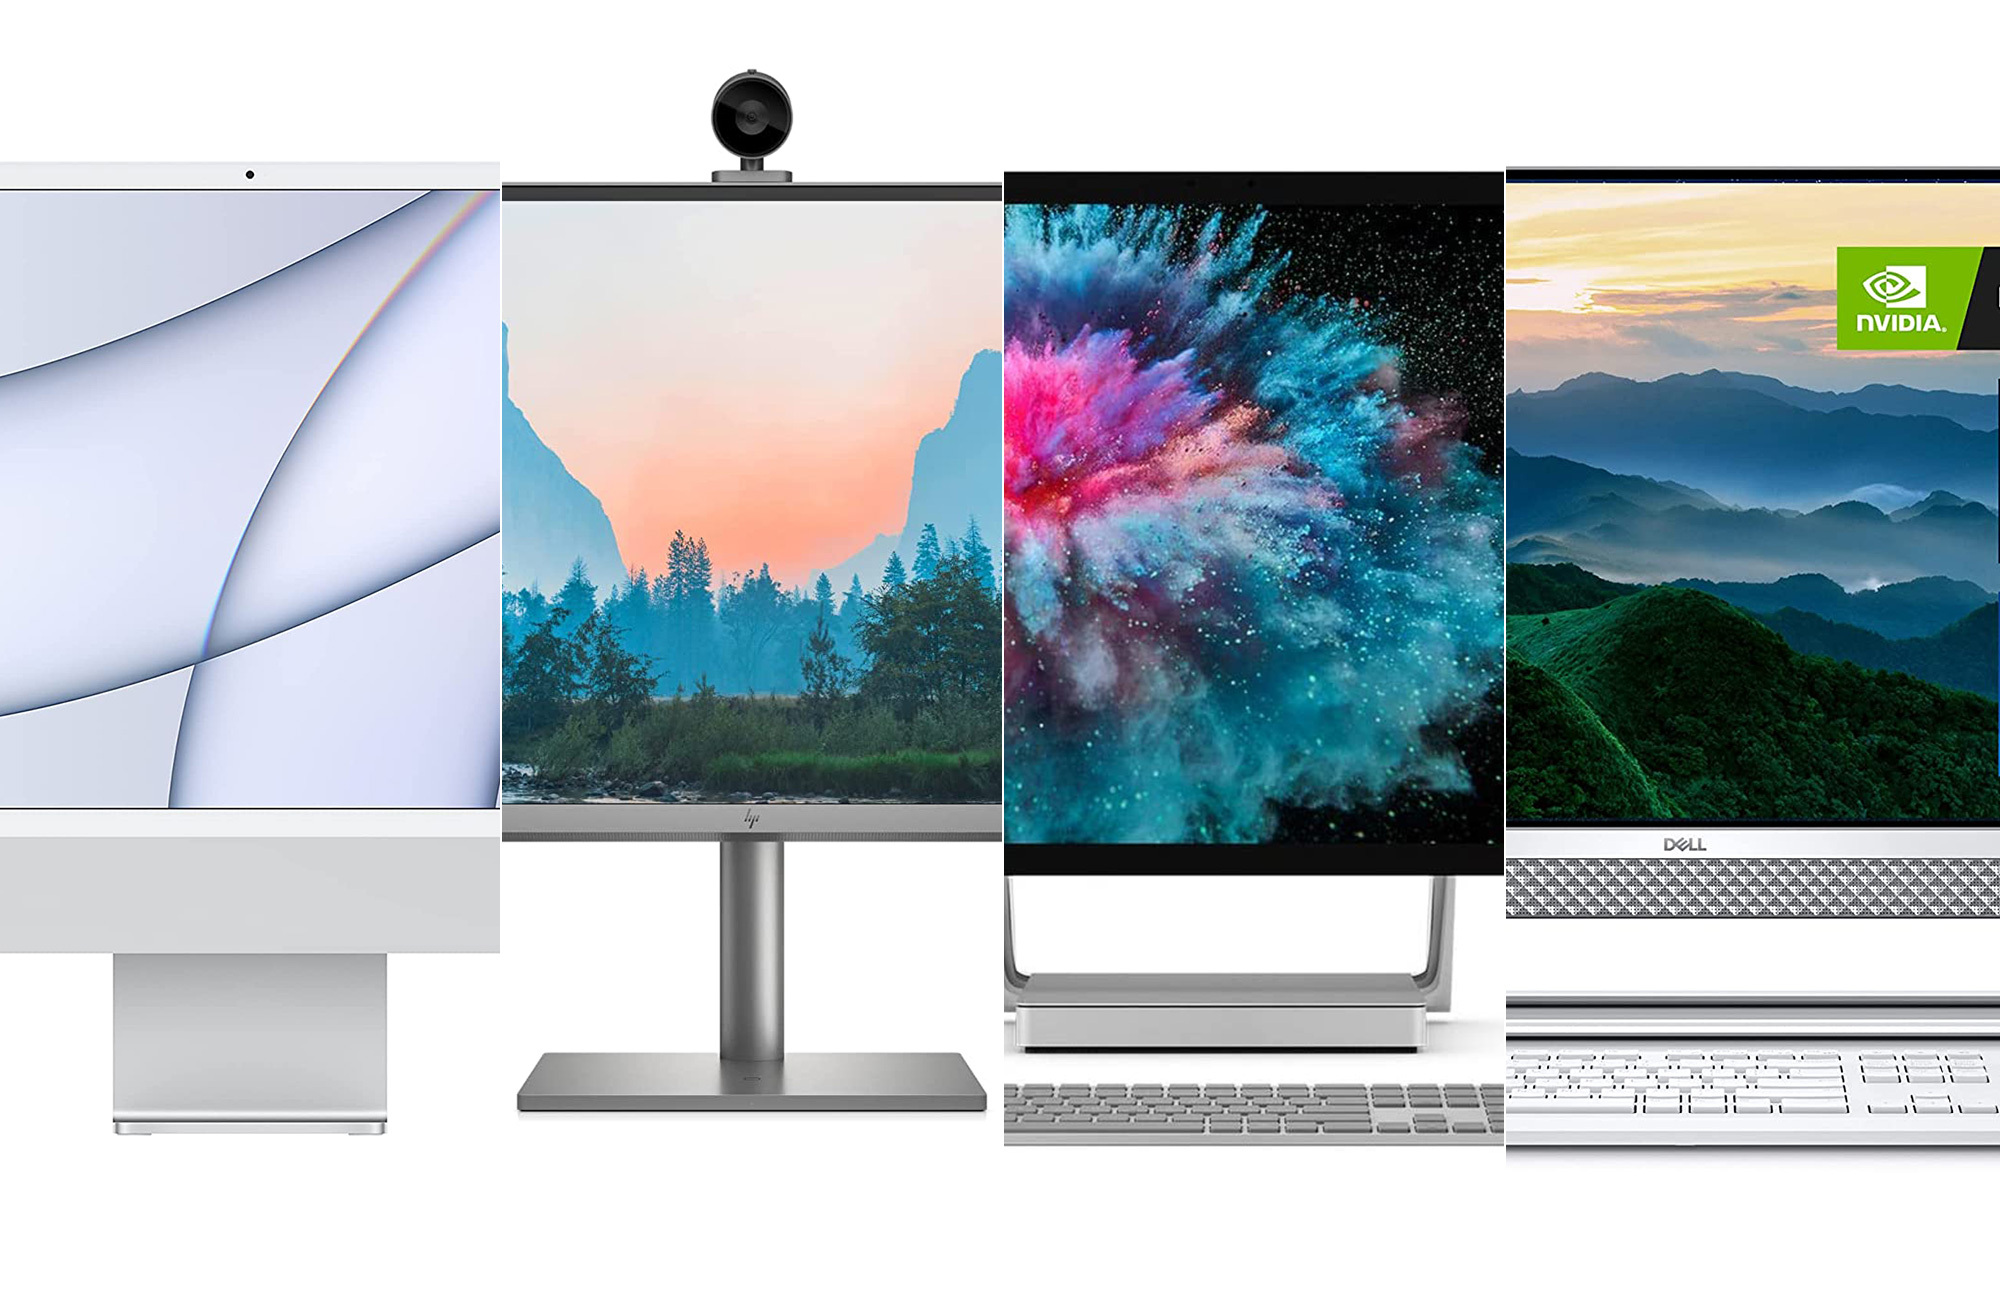 The all-in-one computers of 2023 Popular Science